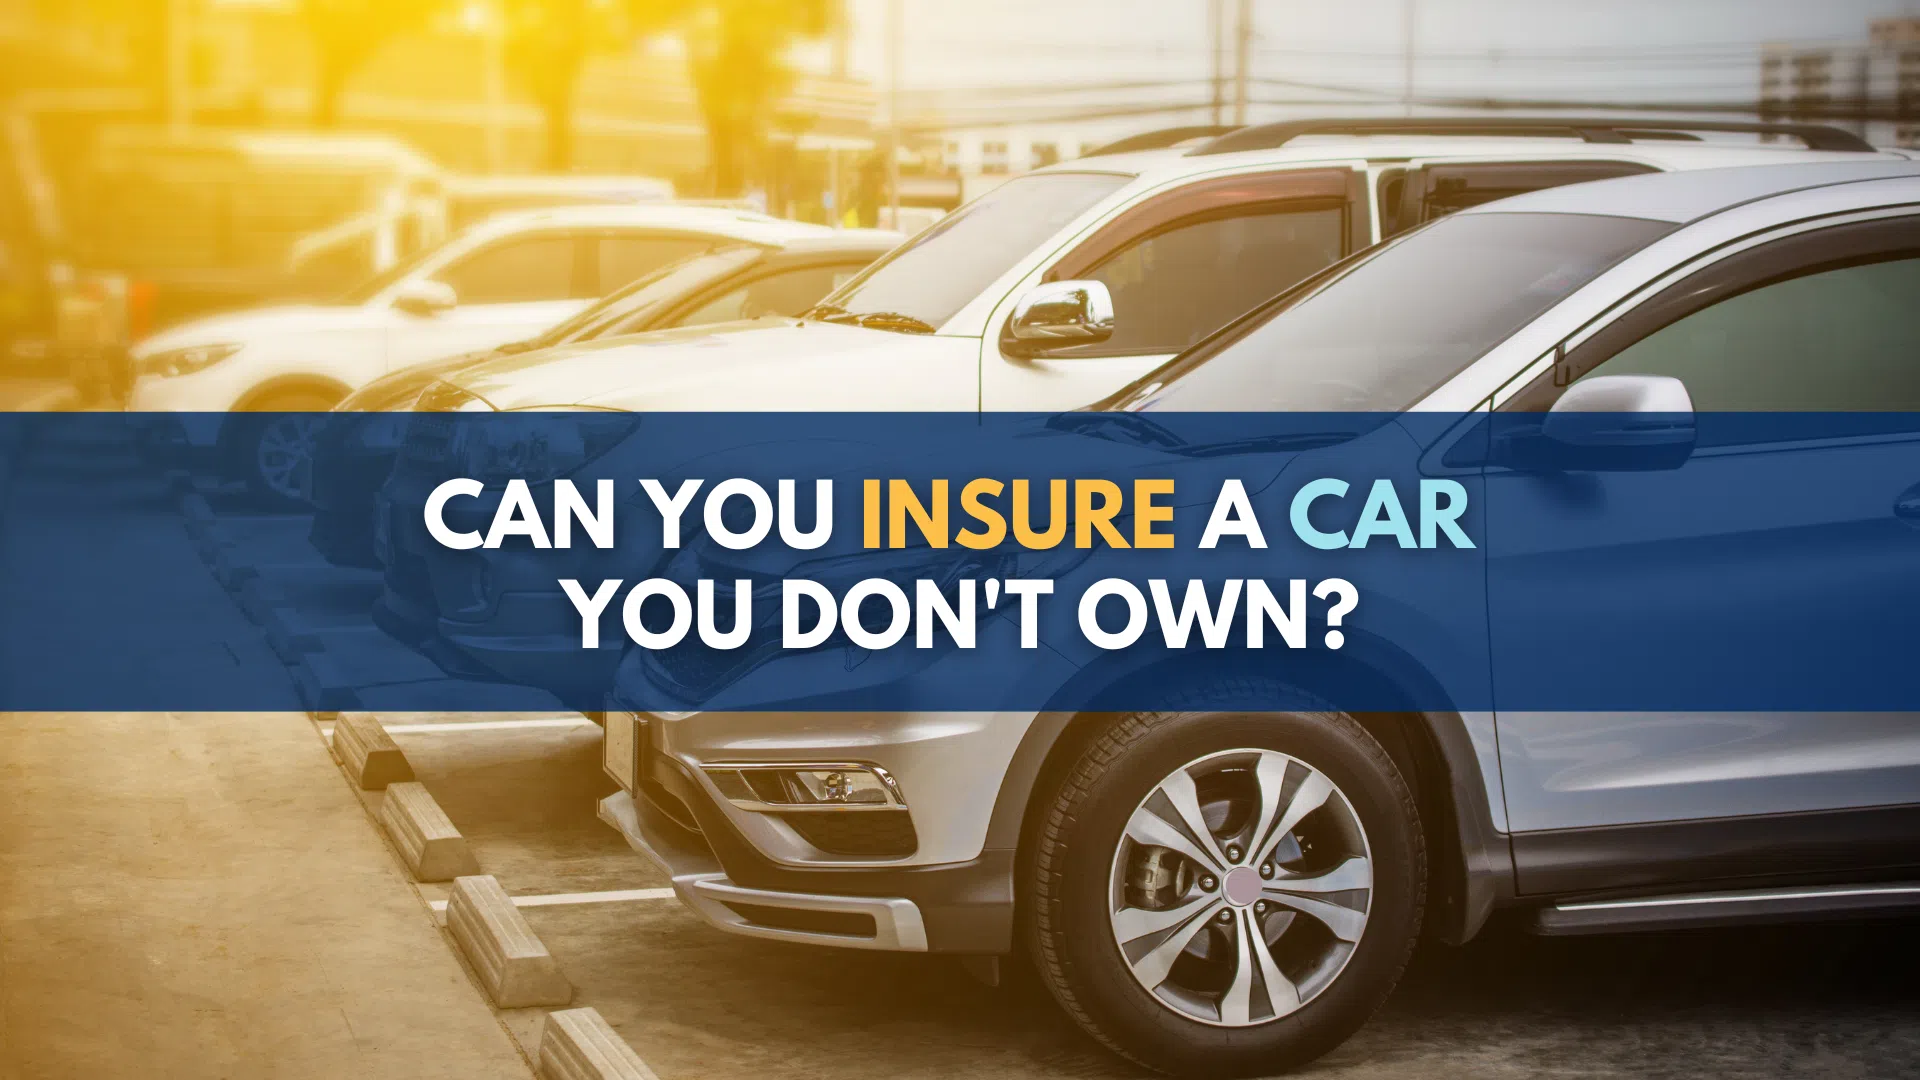 Can You Insure a Car You Don't Own?